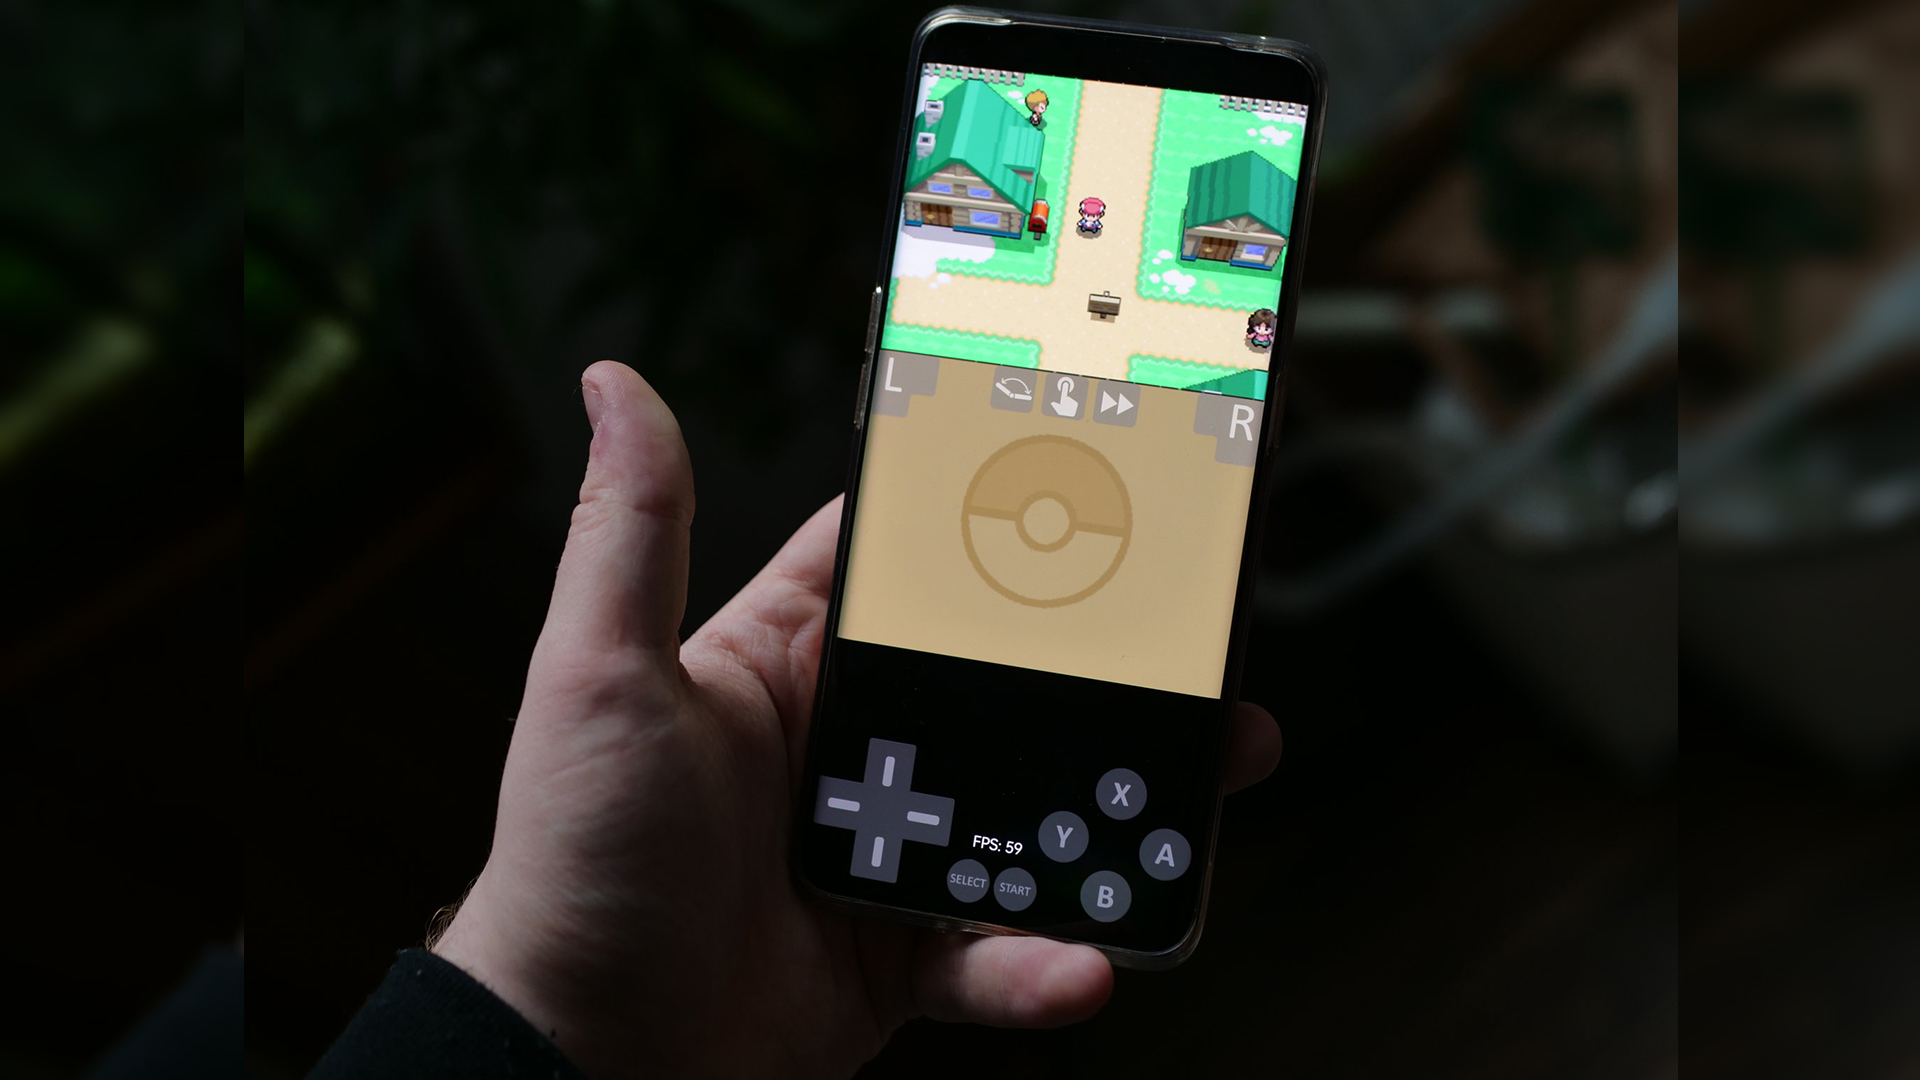 MelonDS, a Nintendo DS emulator, is on for Android | TechRadar